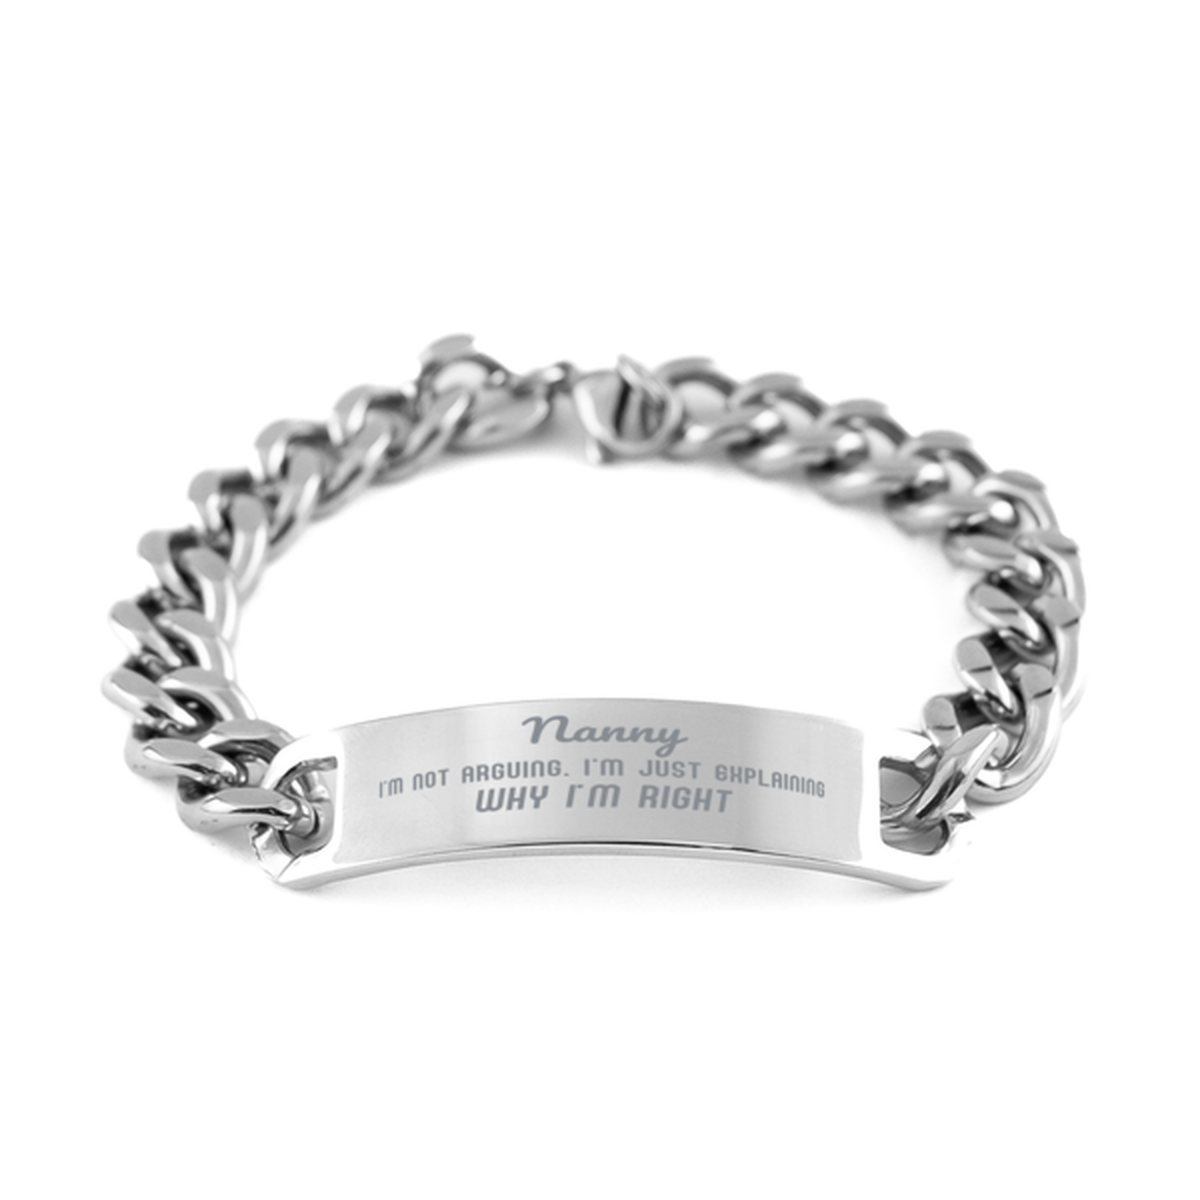 Nanny I'm not Arguing. I'm Just Explaining Why I'm RIGHT Cuban Chain Stainless Steel Bracelet, Graduation Birthday Christmas Nanny Gifts For Nanny Funny Saying Quote Present for Men Women Coworker